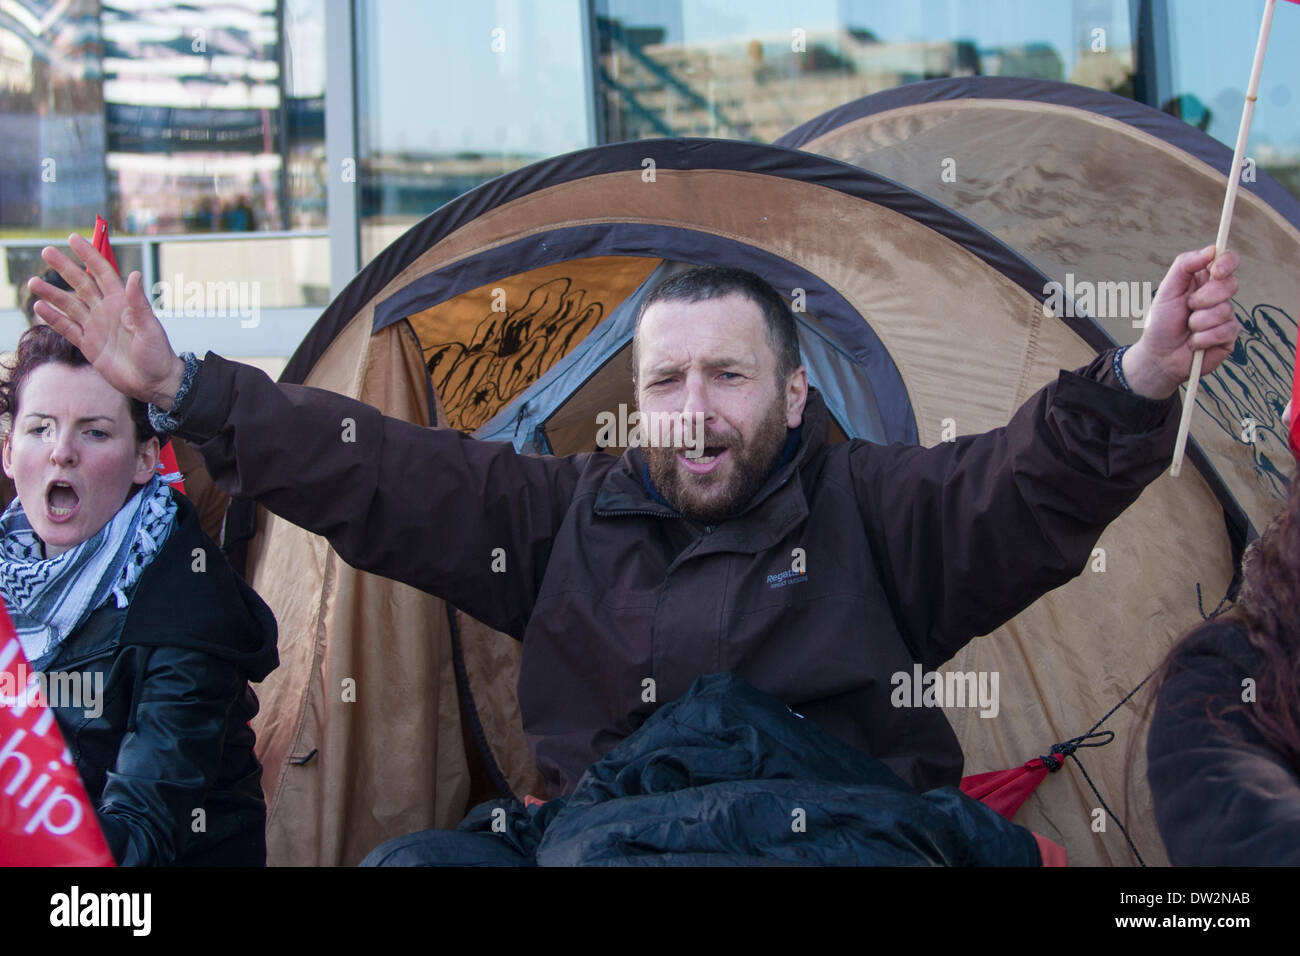 London, February 26th 2014. A small group of demonstrators protest against the 'criminalisation of the homeless' outside City Hall during the Mayor's Question Time. Credit:  Paul Davey/Alamy Live News Stock Photo